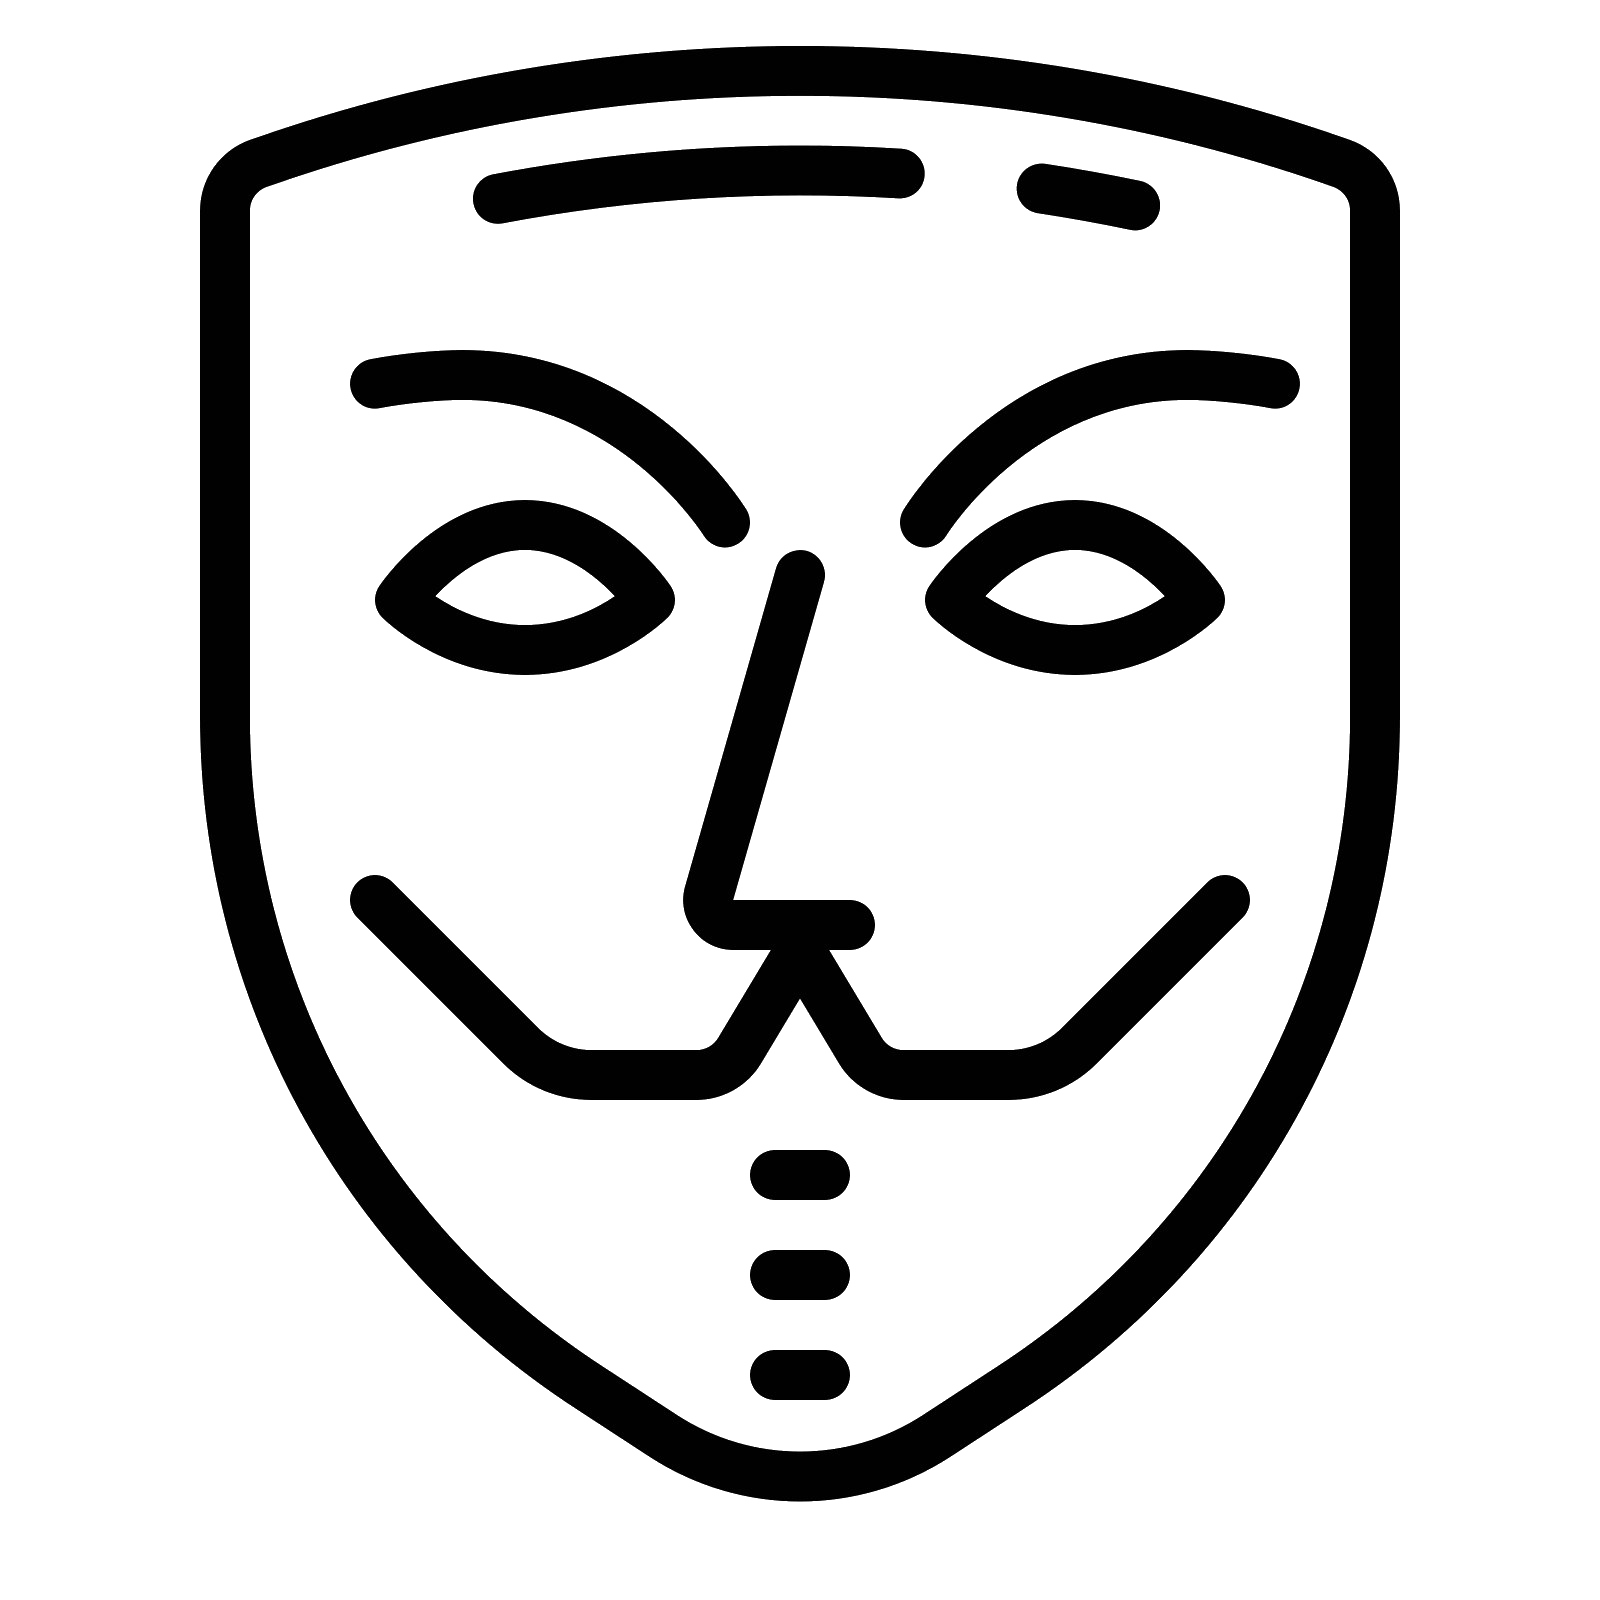 Anonymous Mask PNG